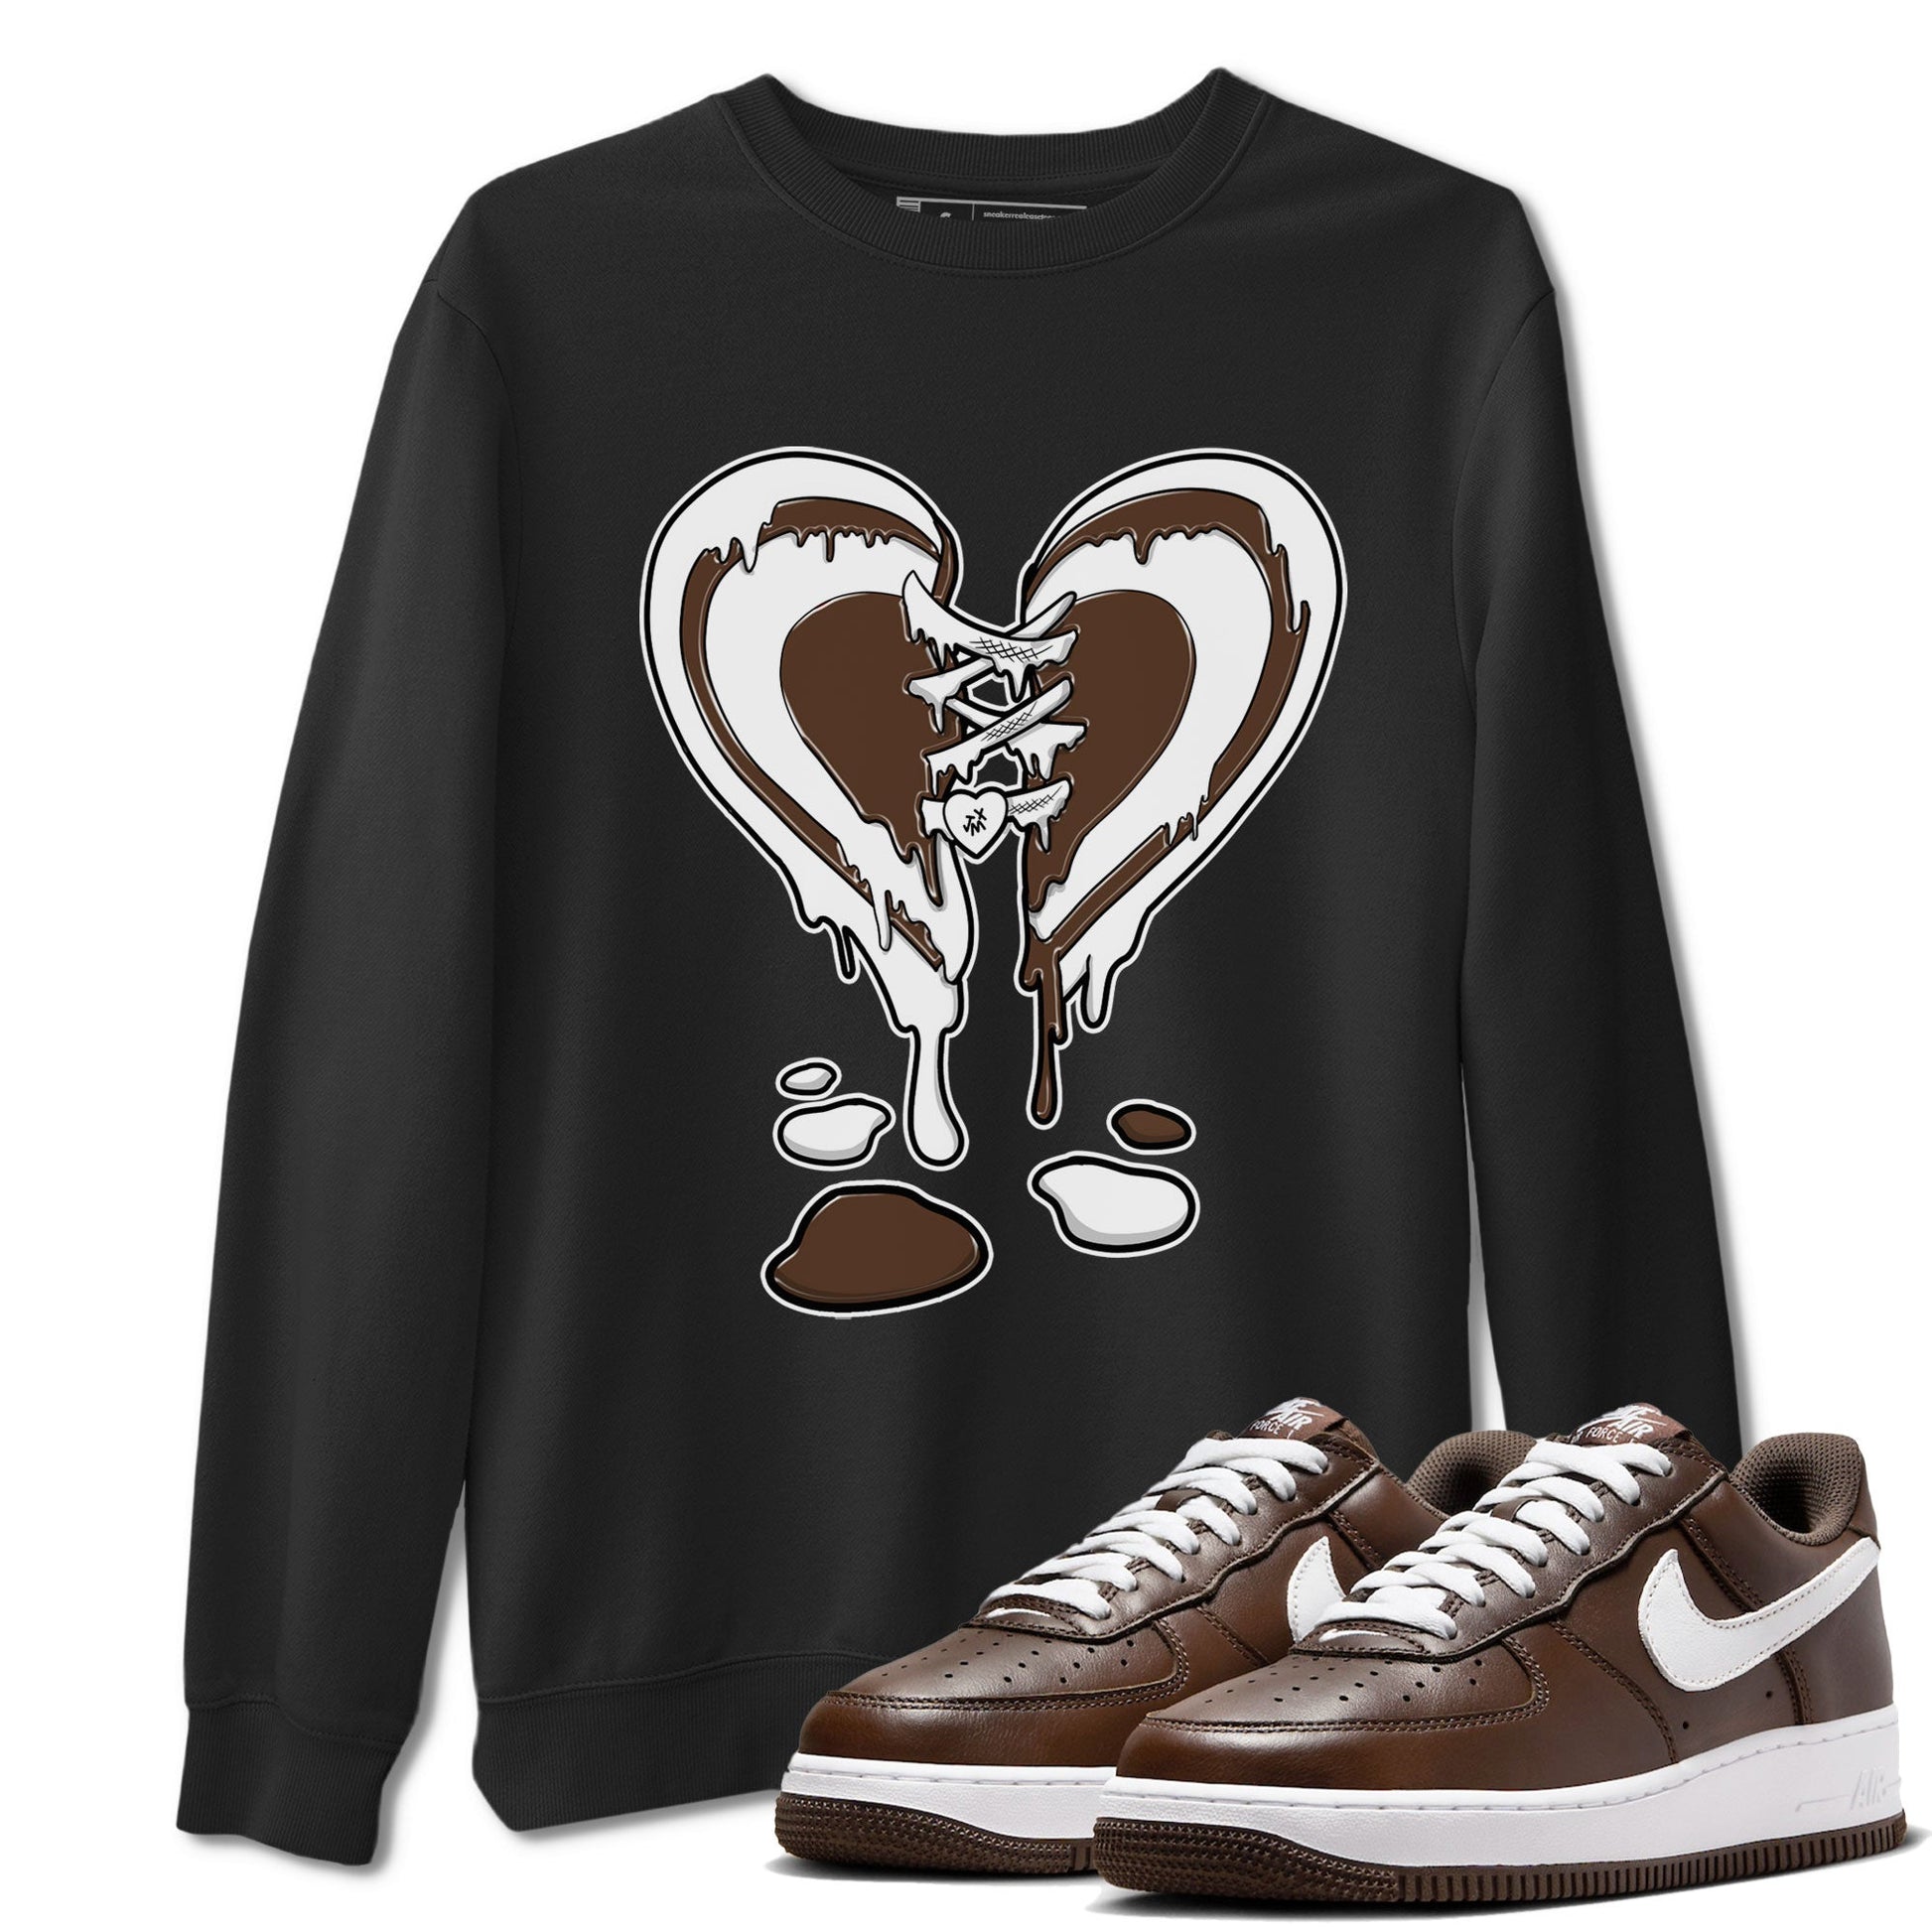 AF1 Chocolate shirt to match jordans Melting Heart sneaker tees Air Force 1 Chocolate SNRT Sneaker Release Tees Cotton Sneaker Tee Black 1 T-Shirt